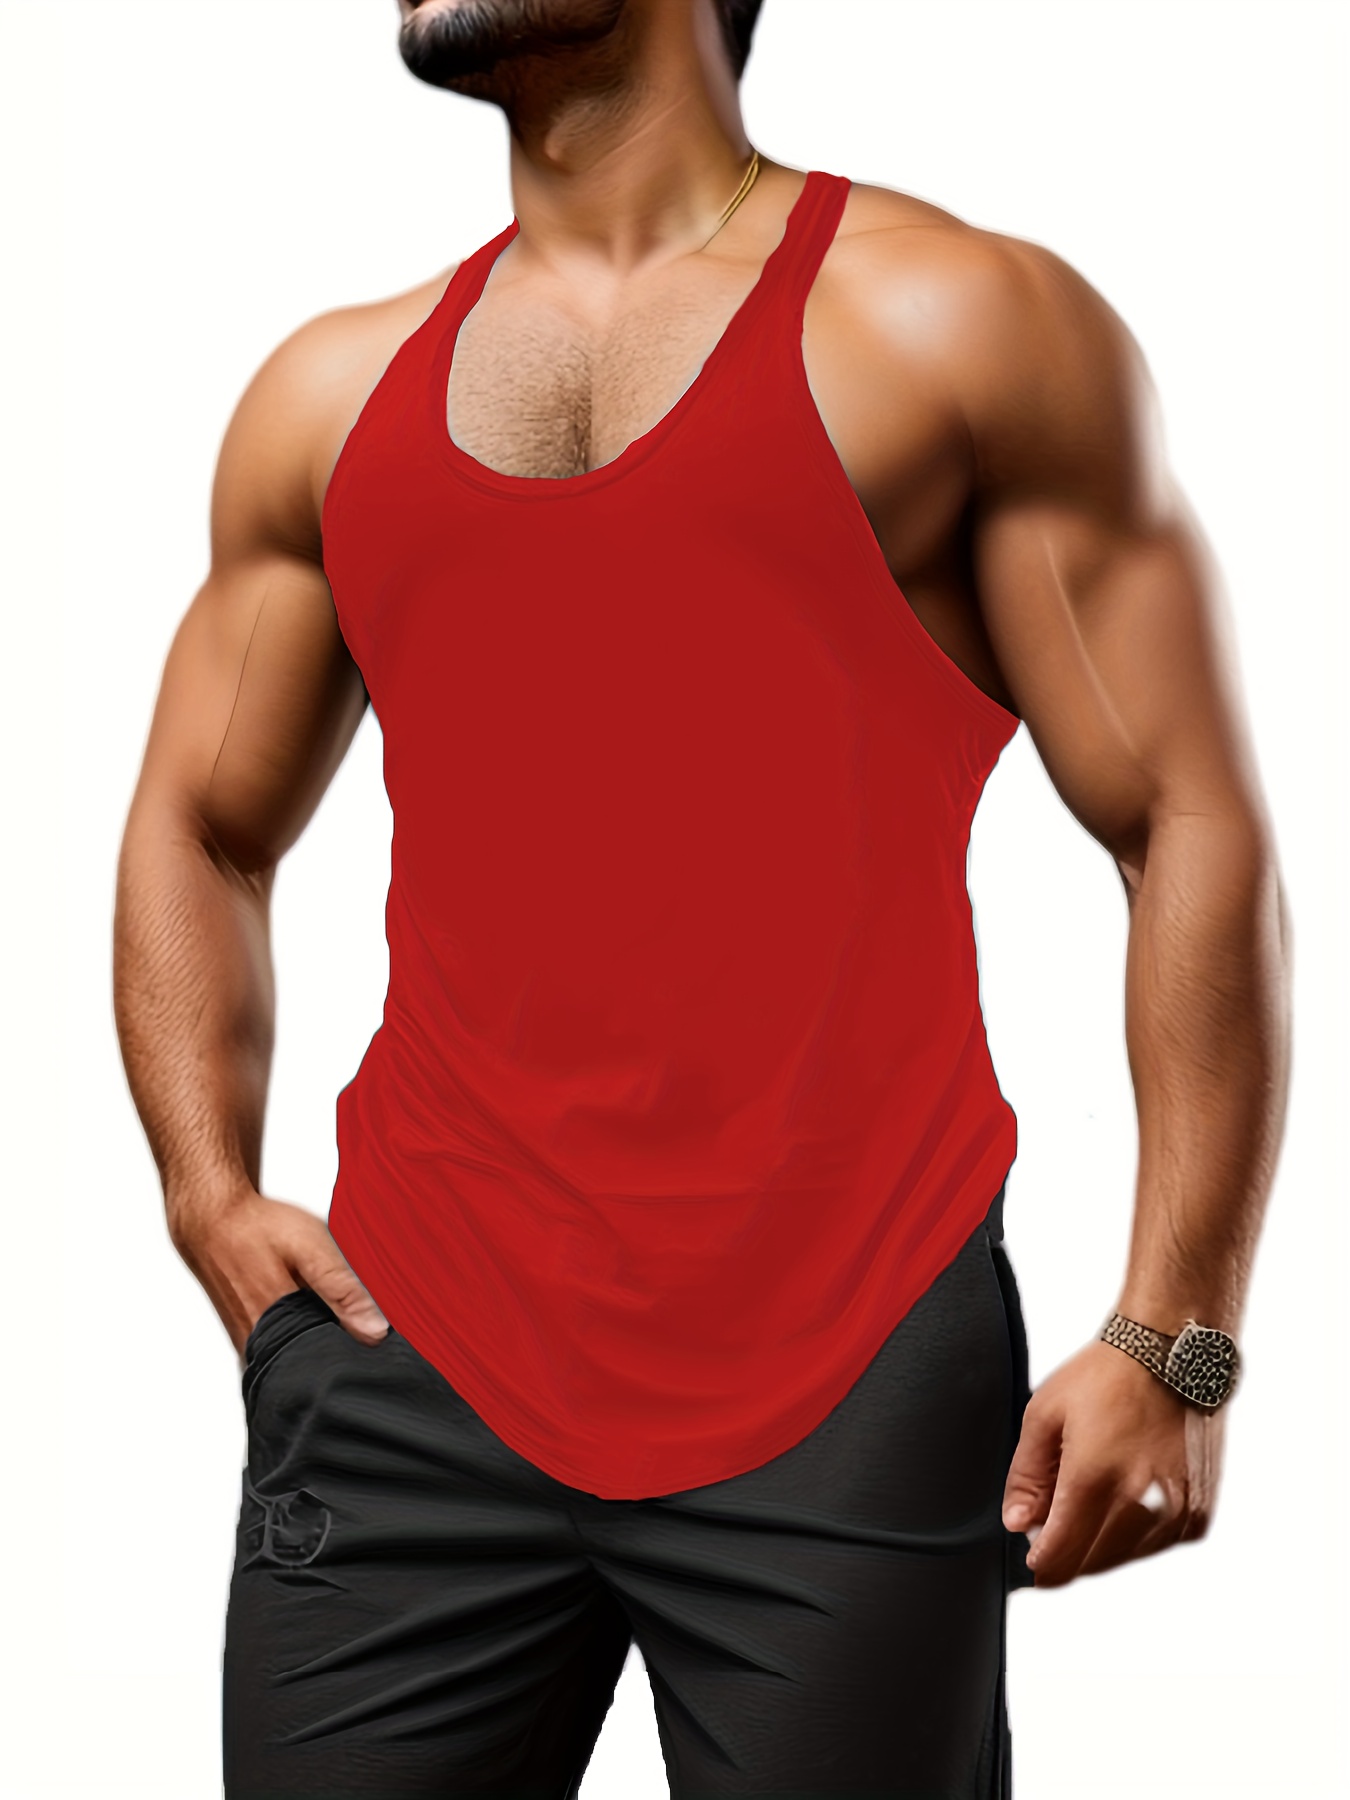 Men's Gym Muscle Singlets Workout Tank Top Fitness Sleeveless T